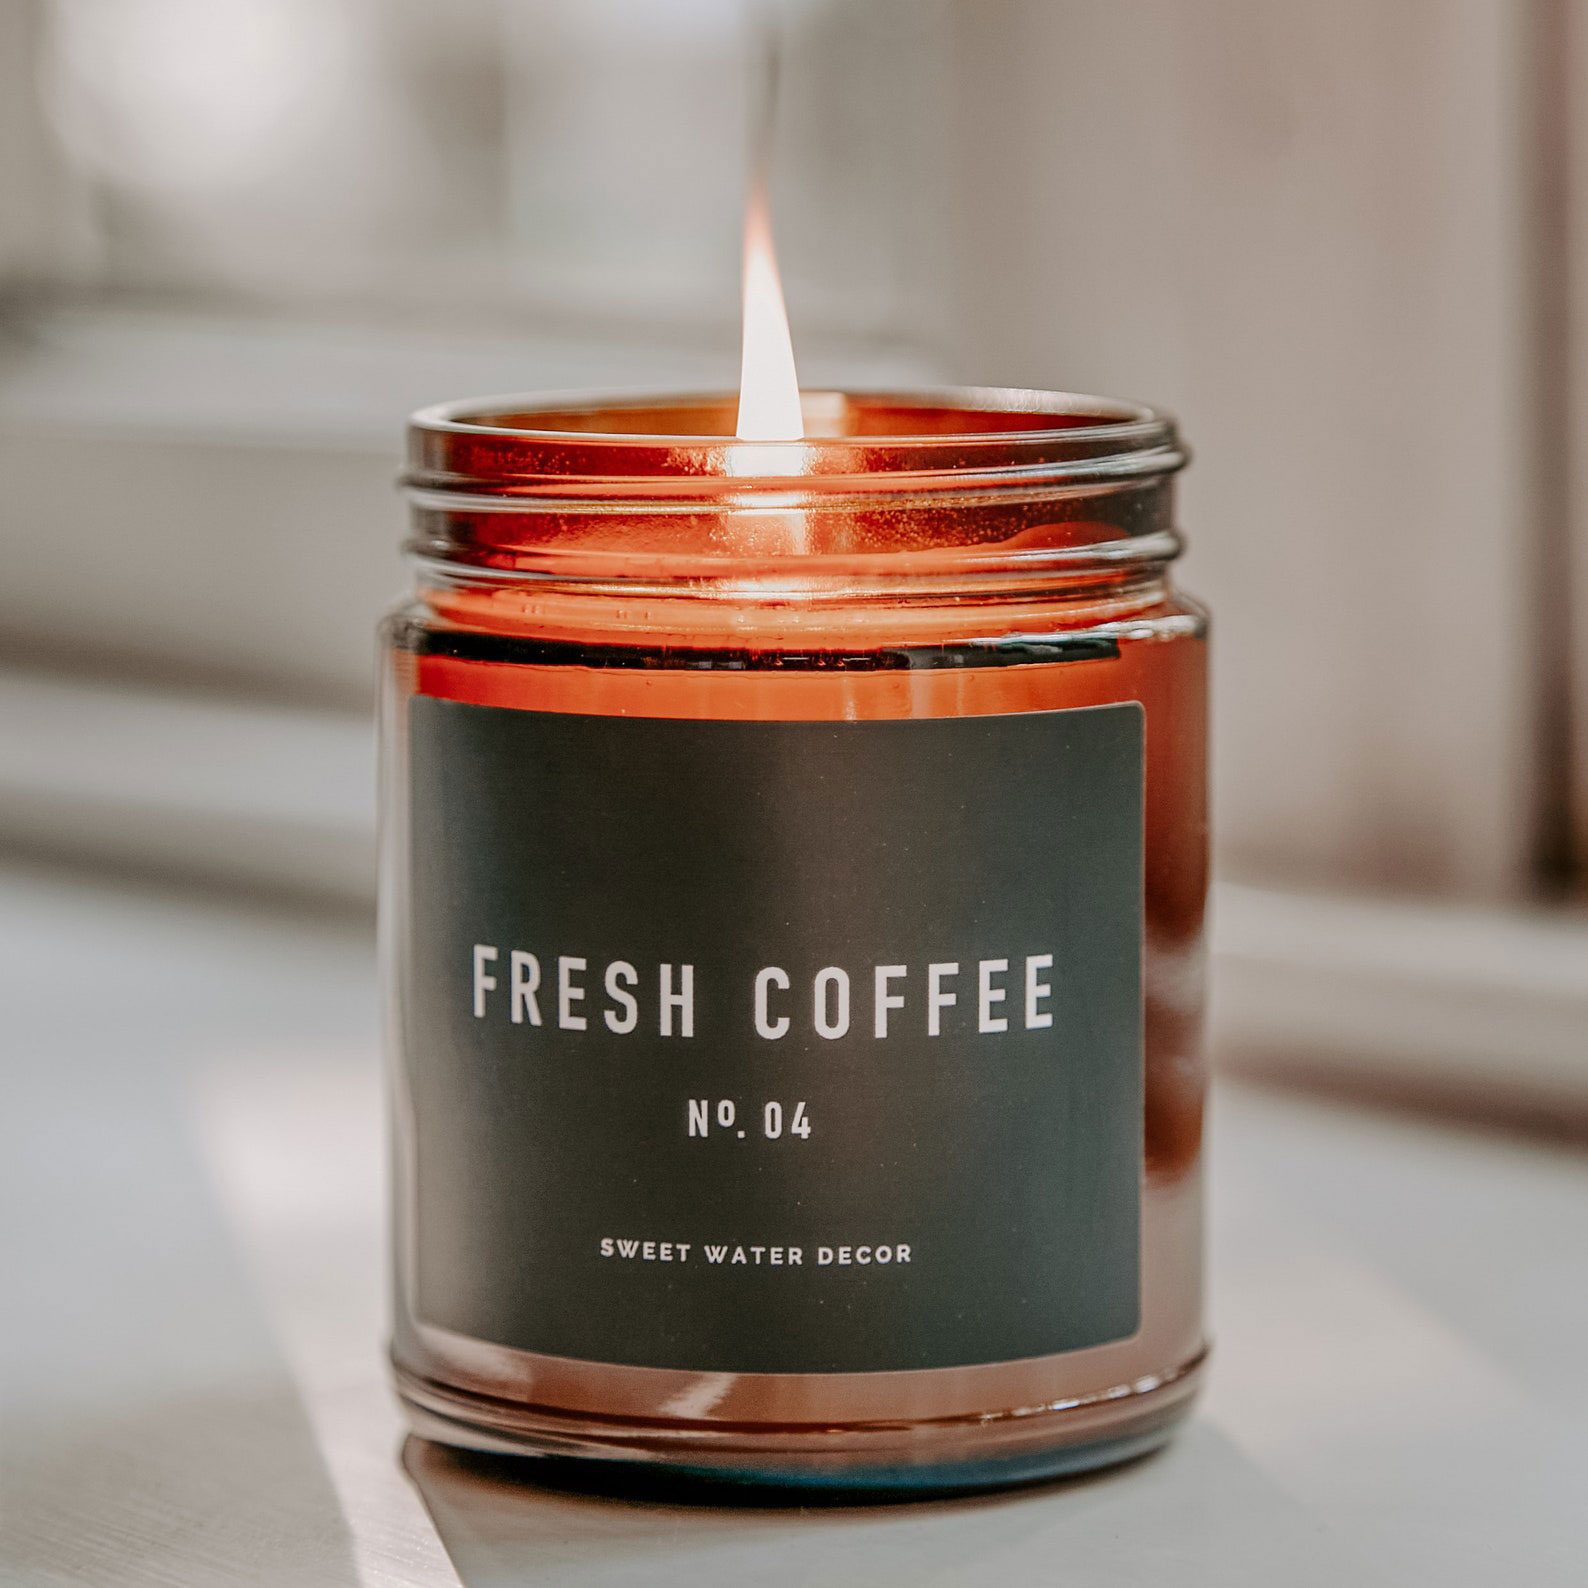 https://www.rd.com/wp-content/uploads/2020/11/Fresh-Coffee-Soy-Wax-Candle-via-sweetwaterdecor_etsy.jpg?fit=700%2C700